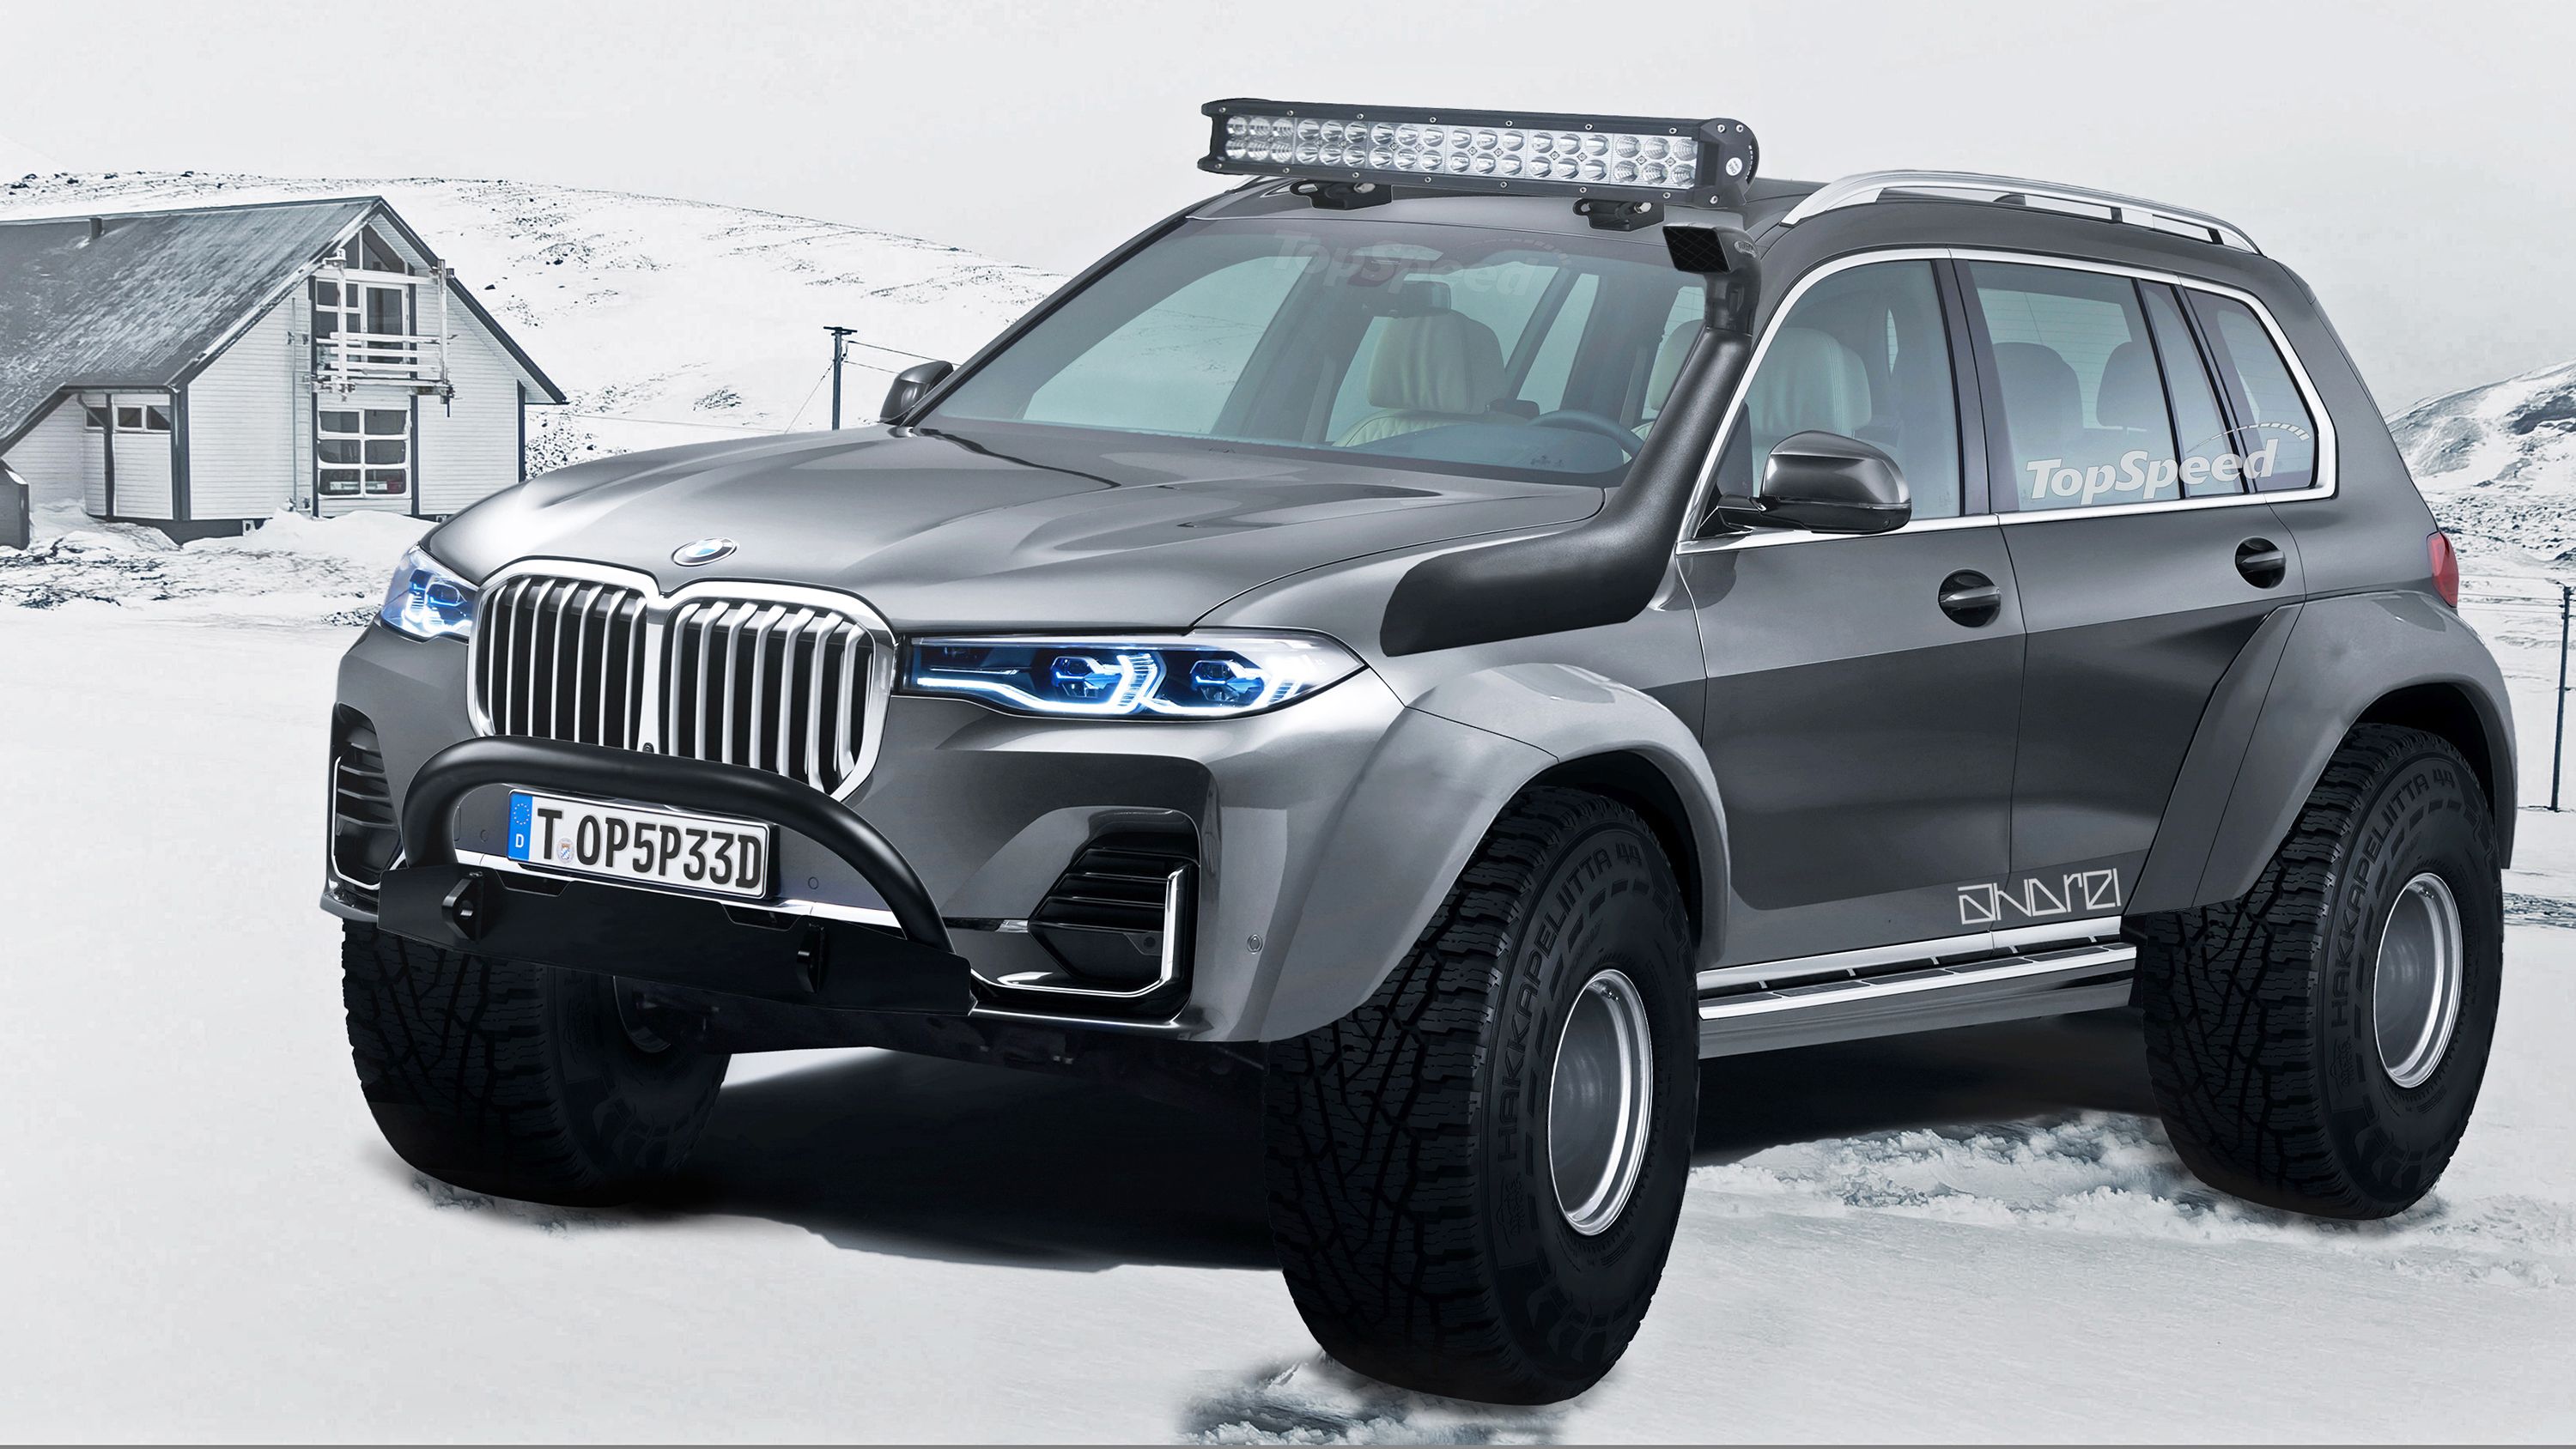 2018 The Arctic Trucks BMW X7 Isn't Real but We Want One